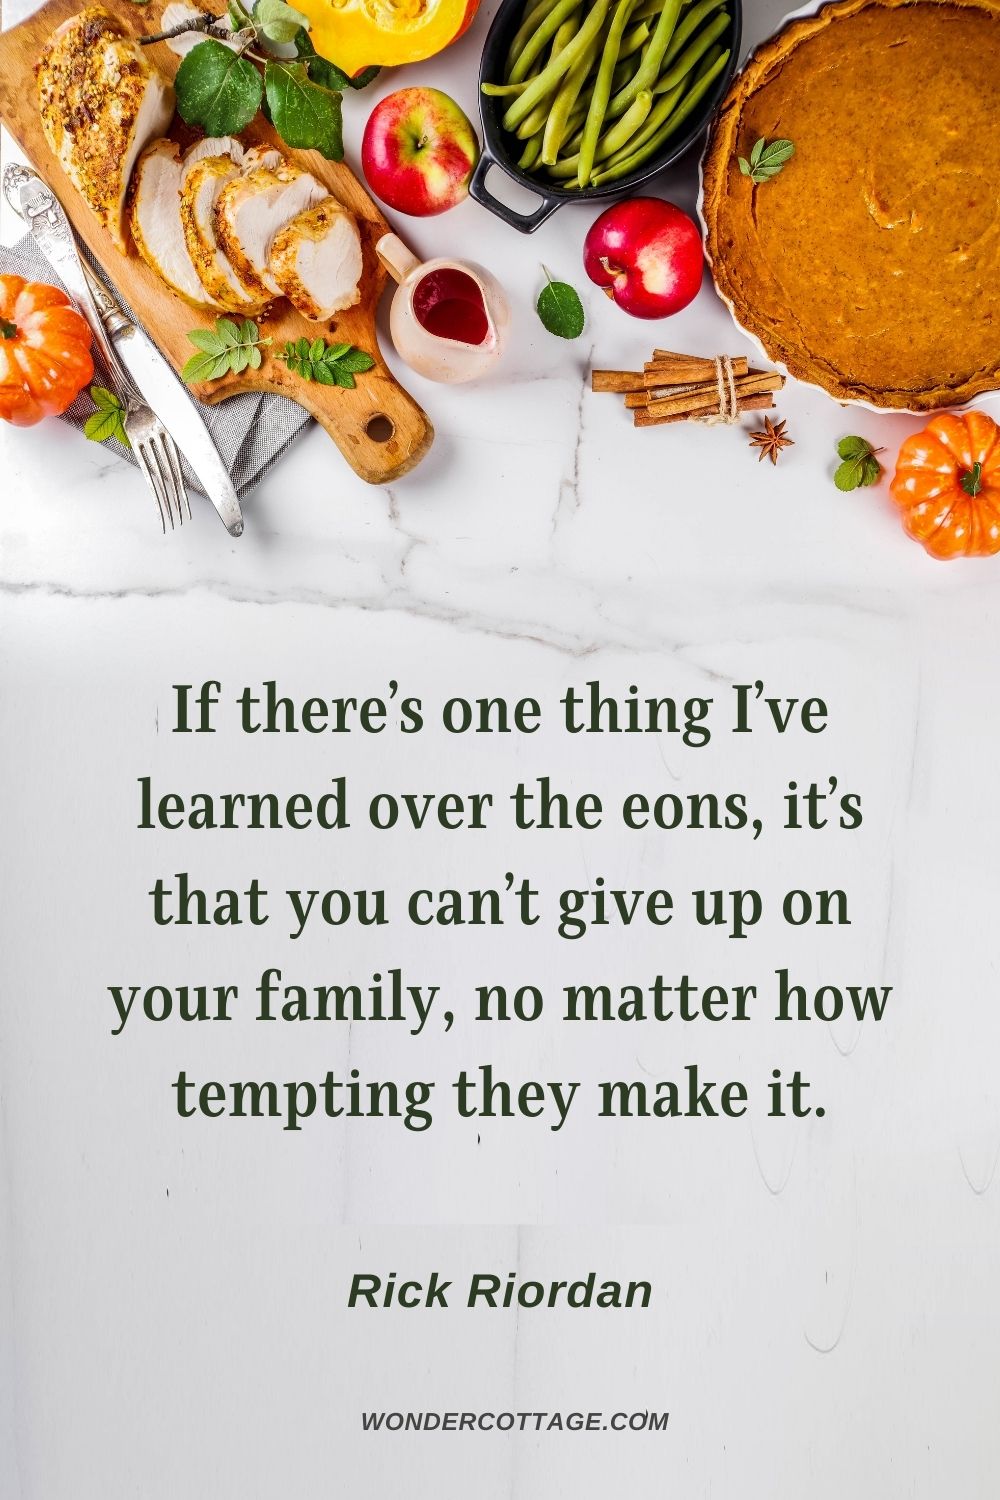 If there’s one thing I’ve learned over the eons, it’s that you can’t give up on your family, no matter how tempting they make it. Rick Riordan